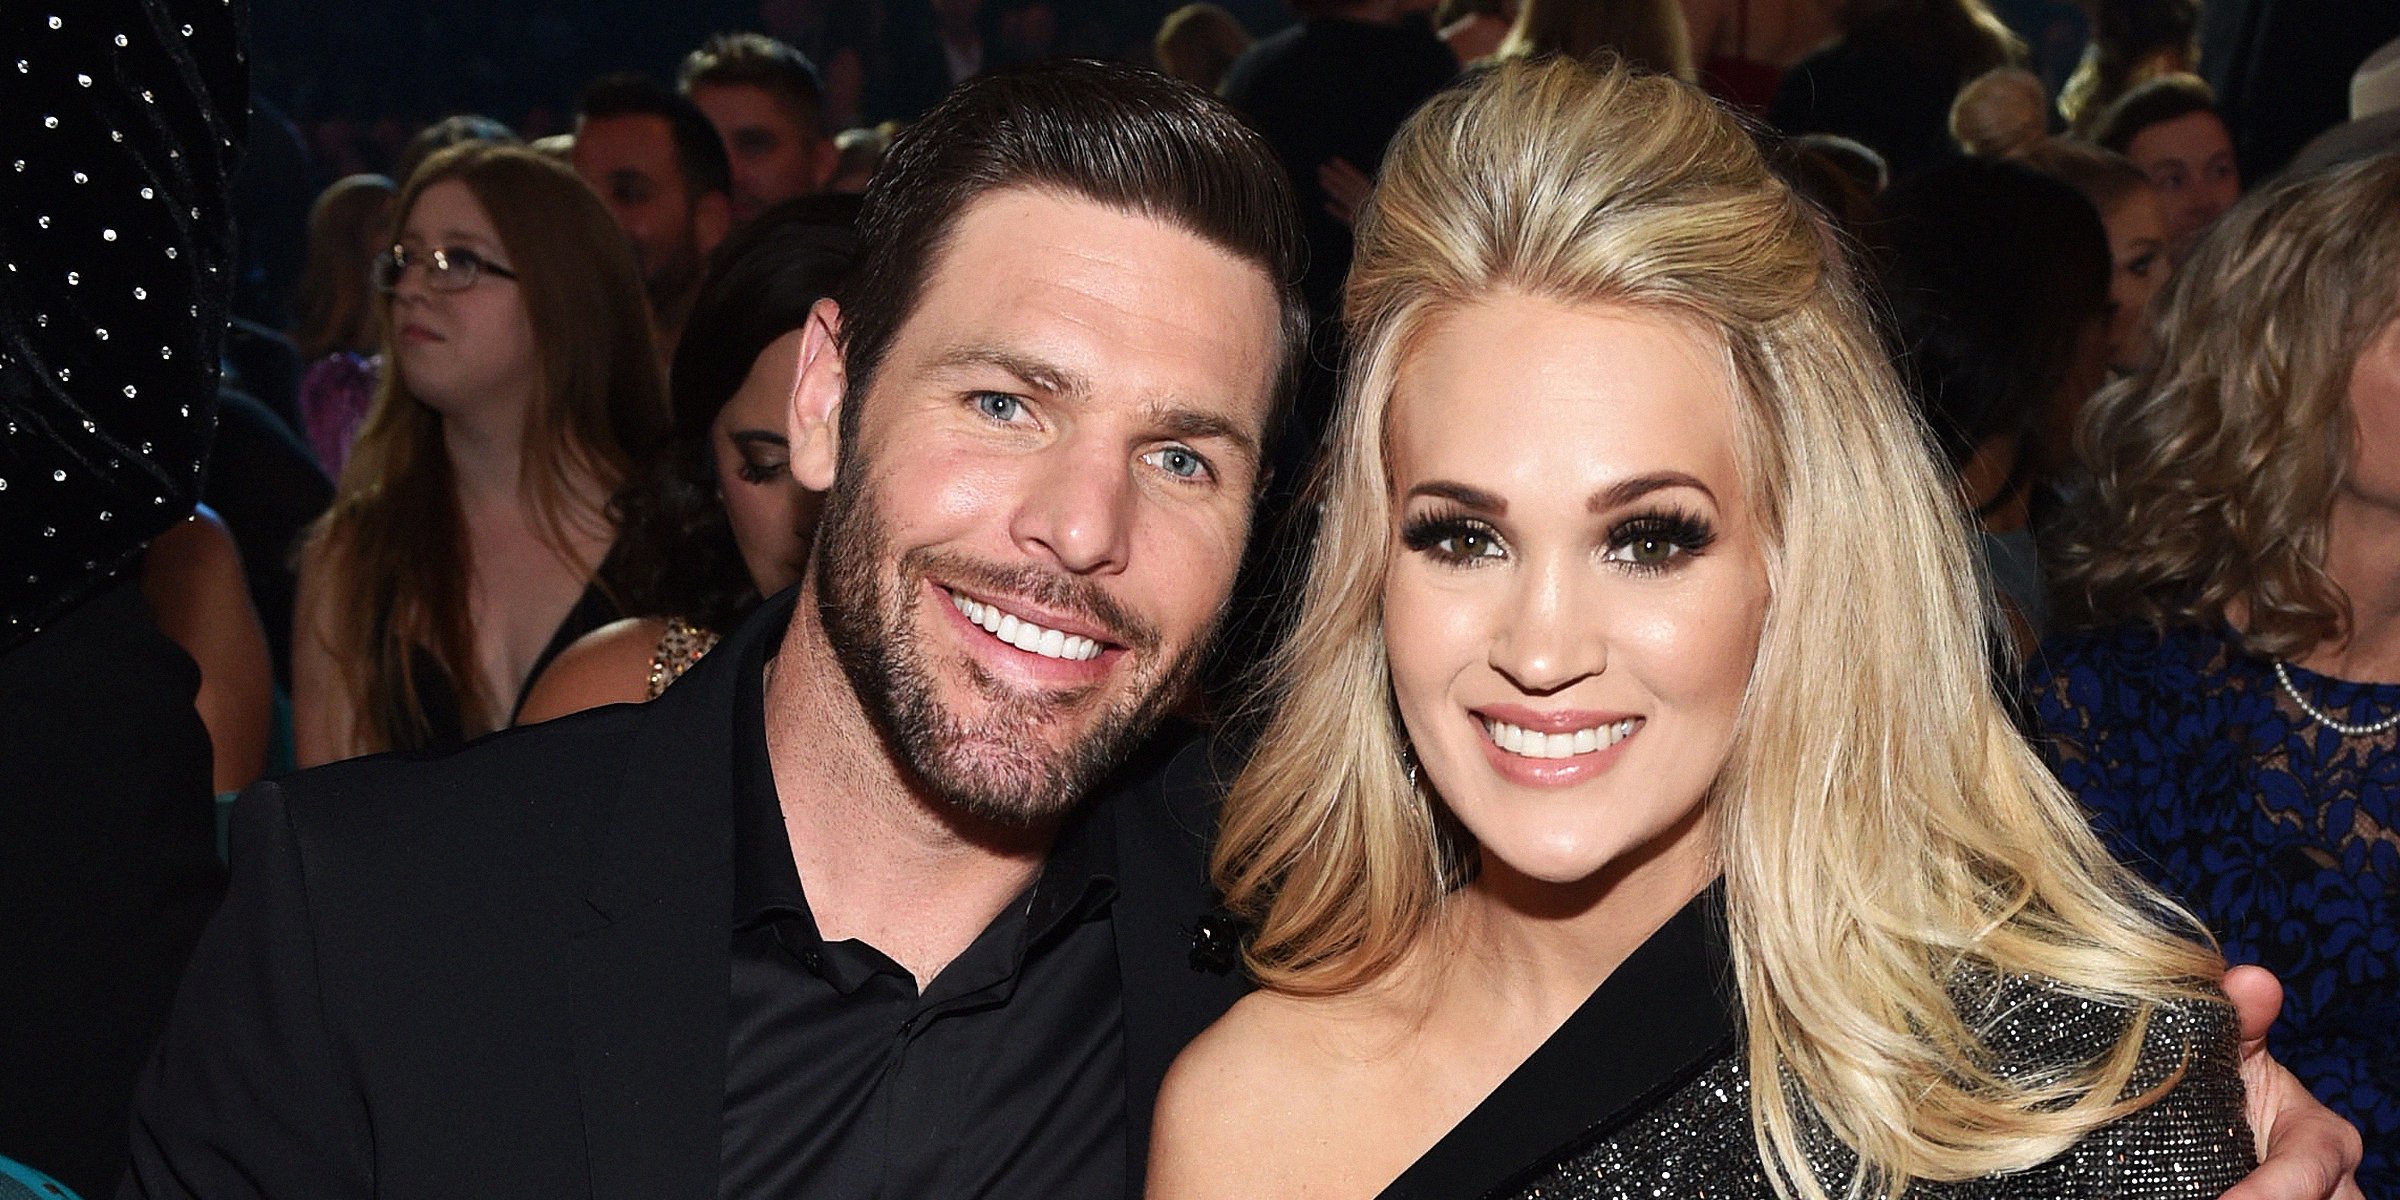 Mike Fisher and Carrie Underwood | Source: Getty Images